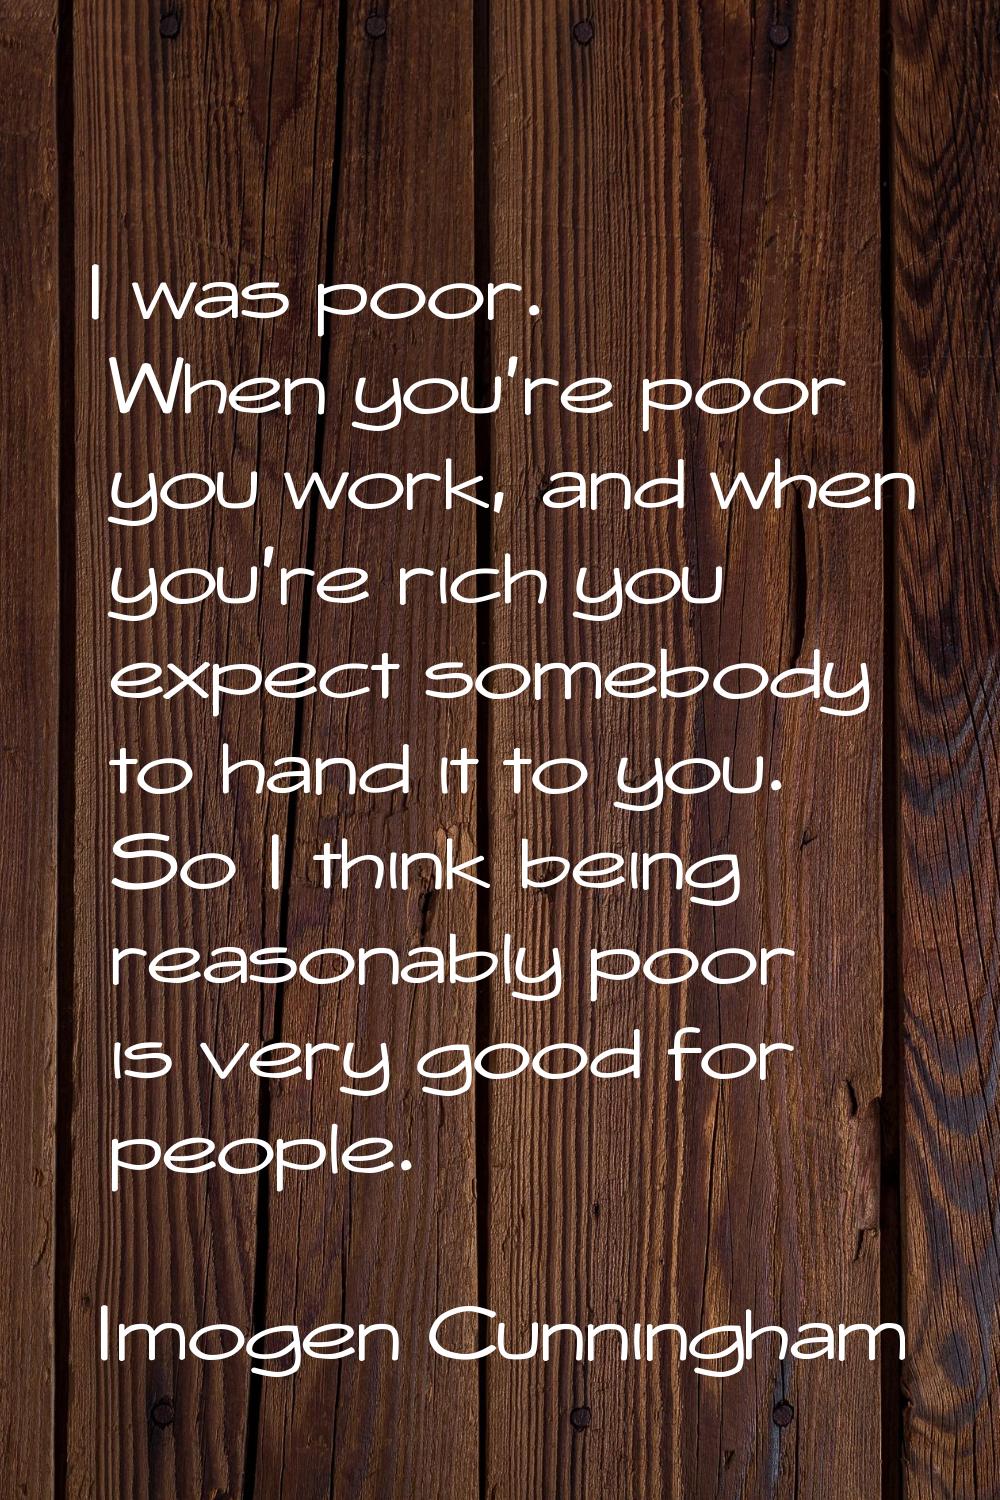 I was poor. When you're poor you work, and when you're rich you expect somebody to hand it to you. 